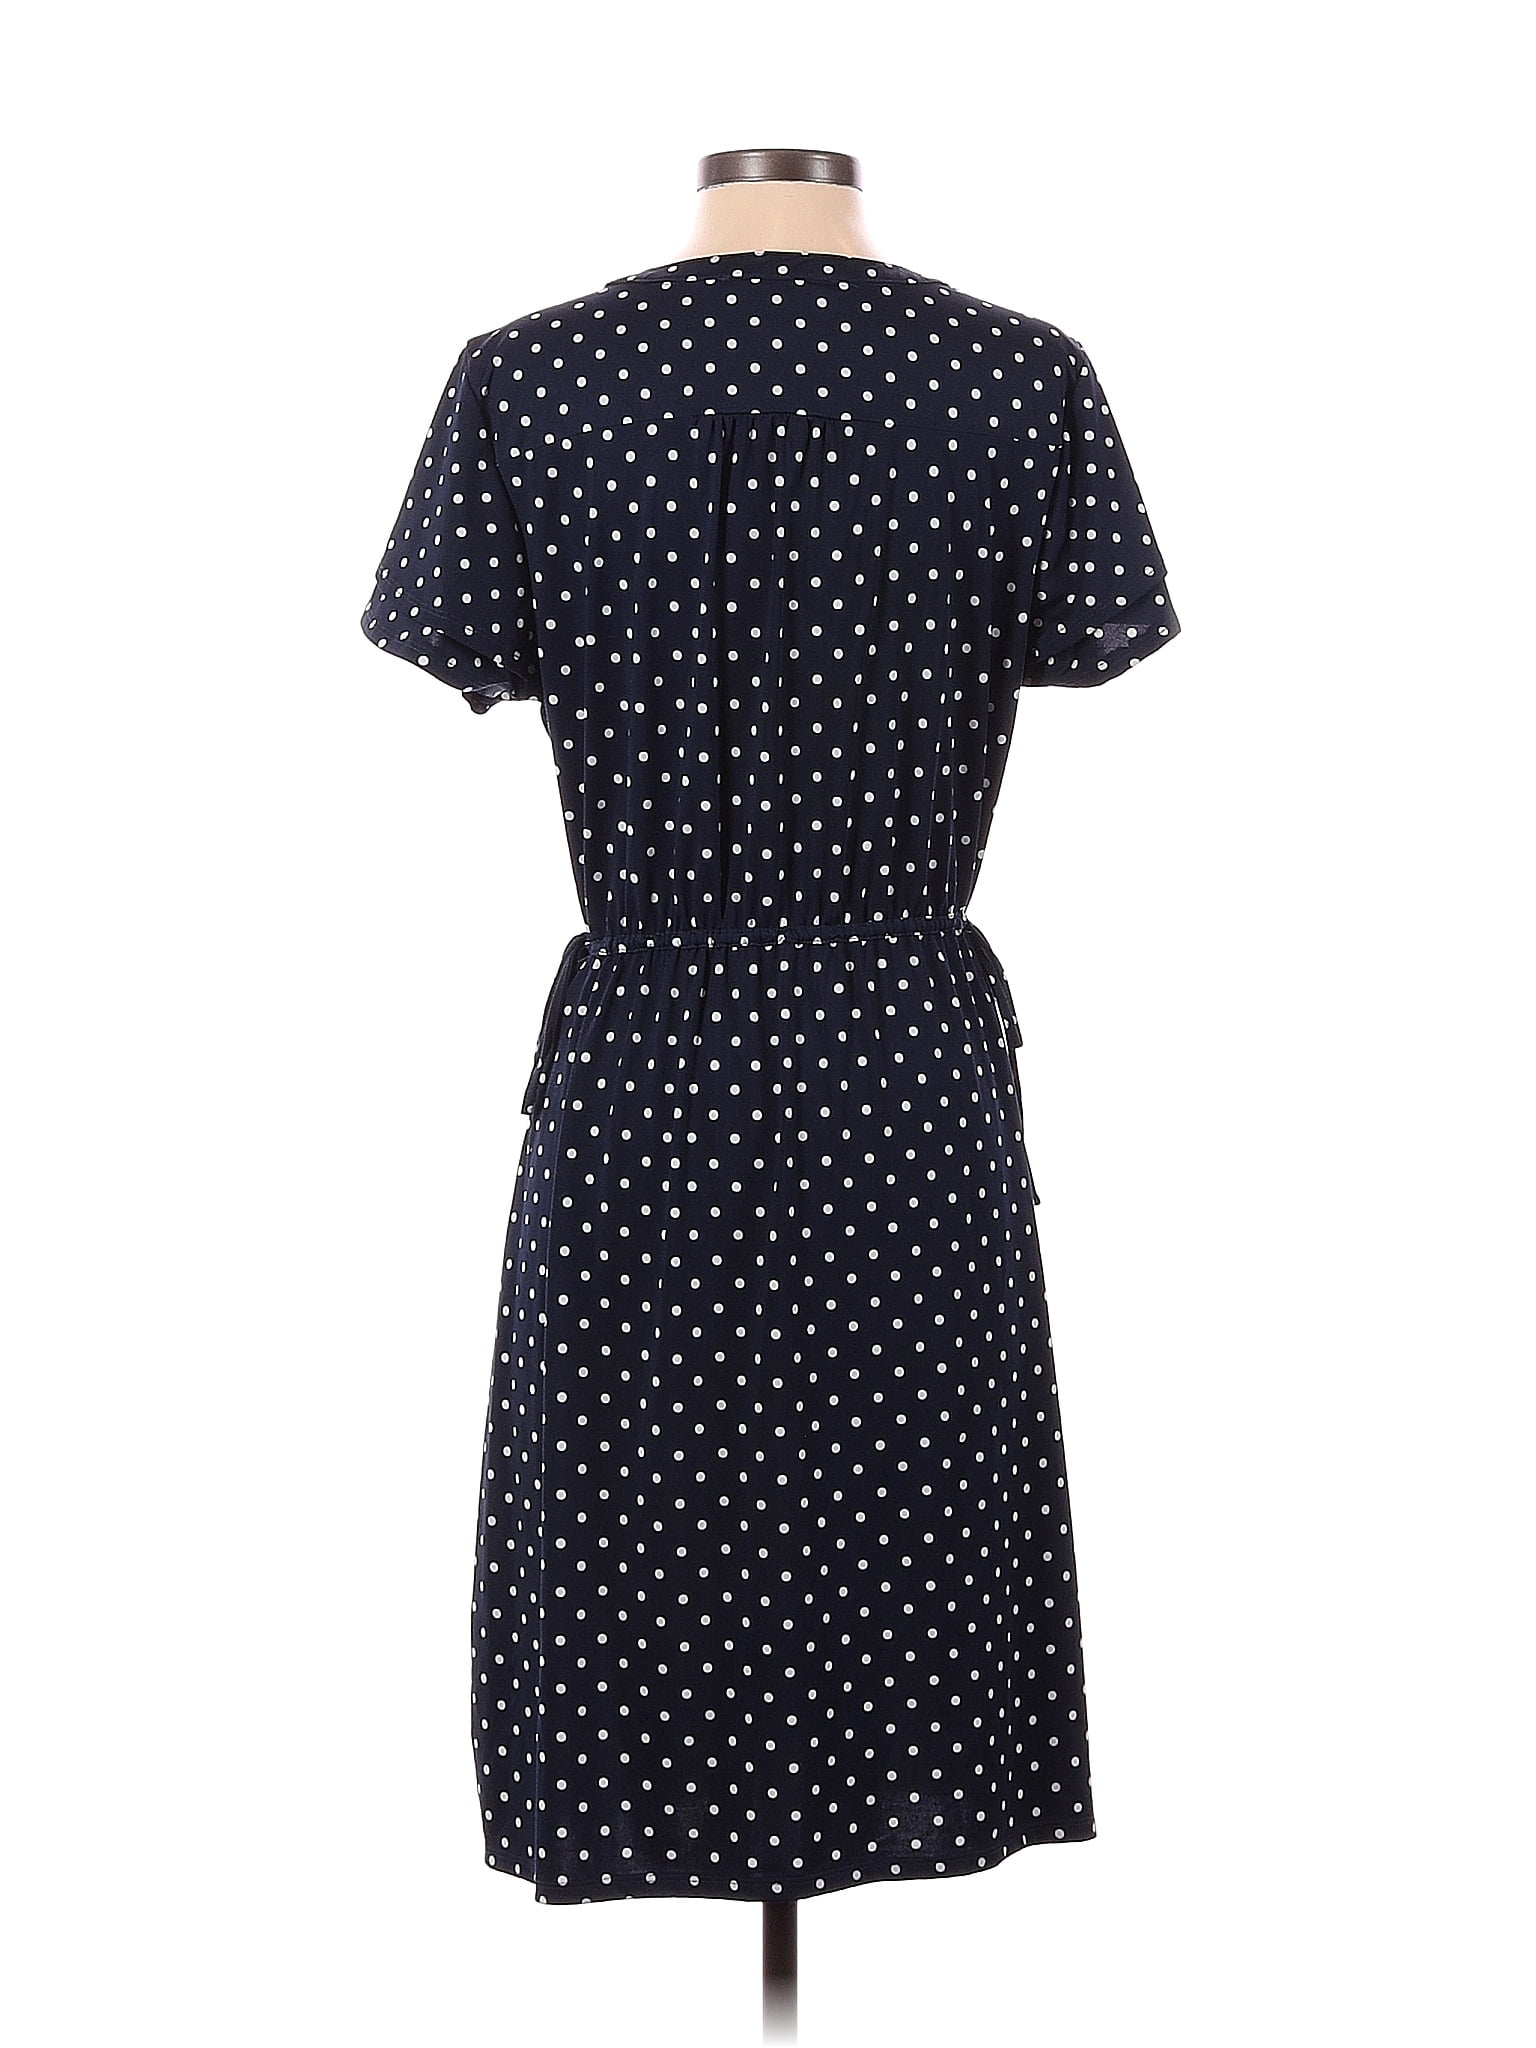 Robert Louis Women's dress, Size PL, Color Dark Blue with Polka  Dots,Pre-owned.G